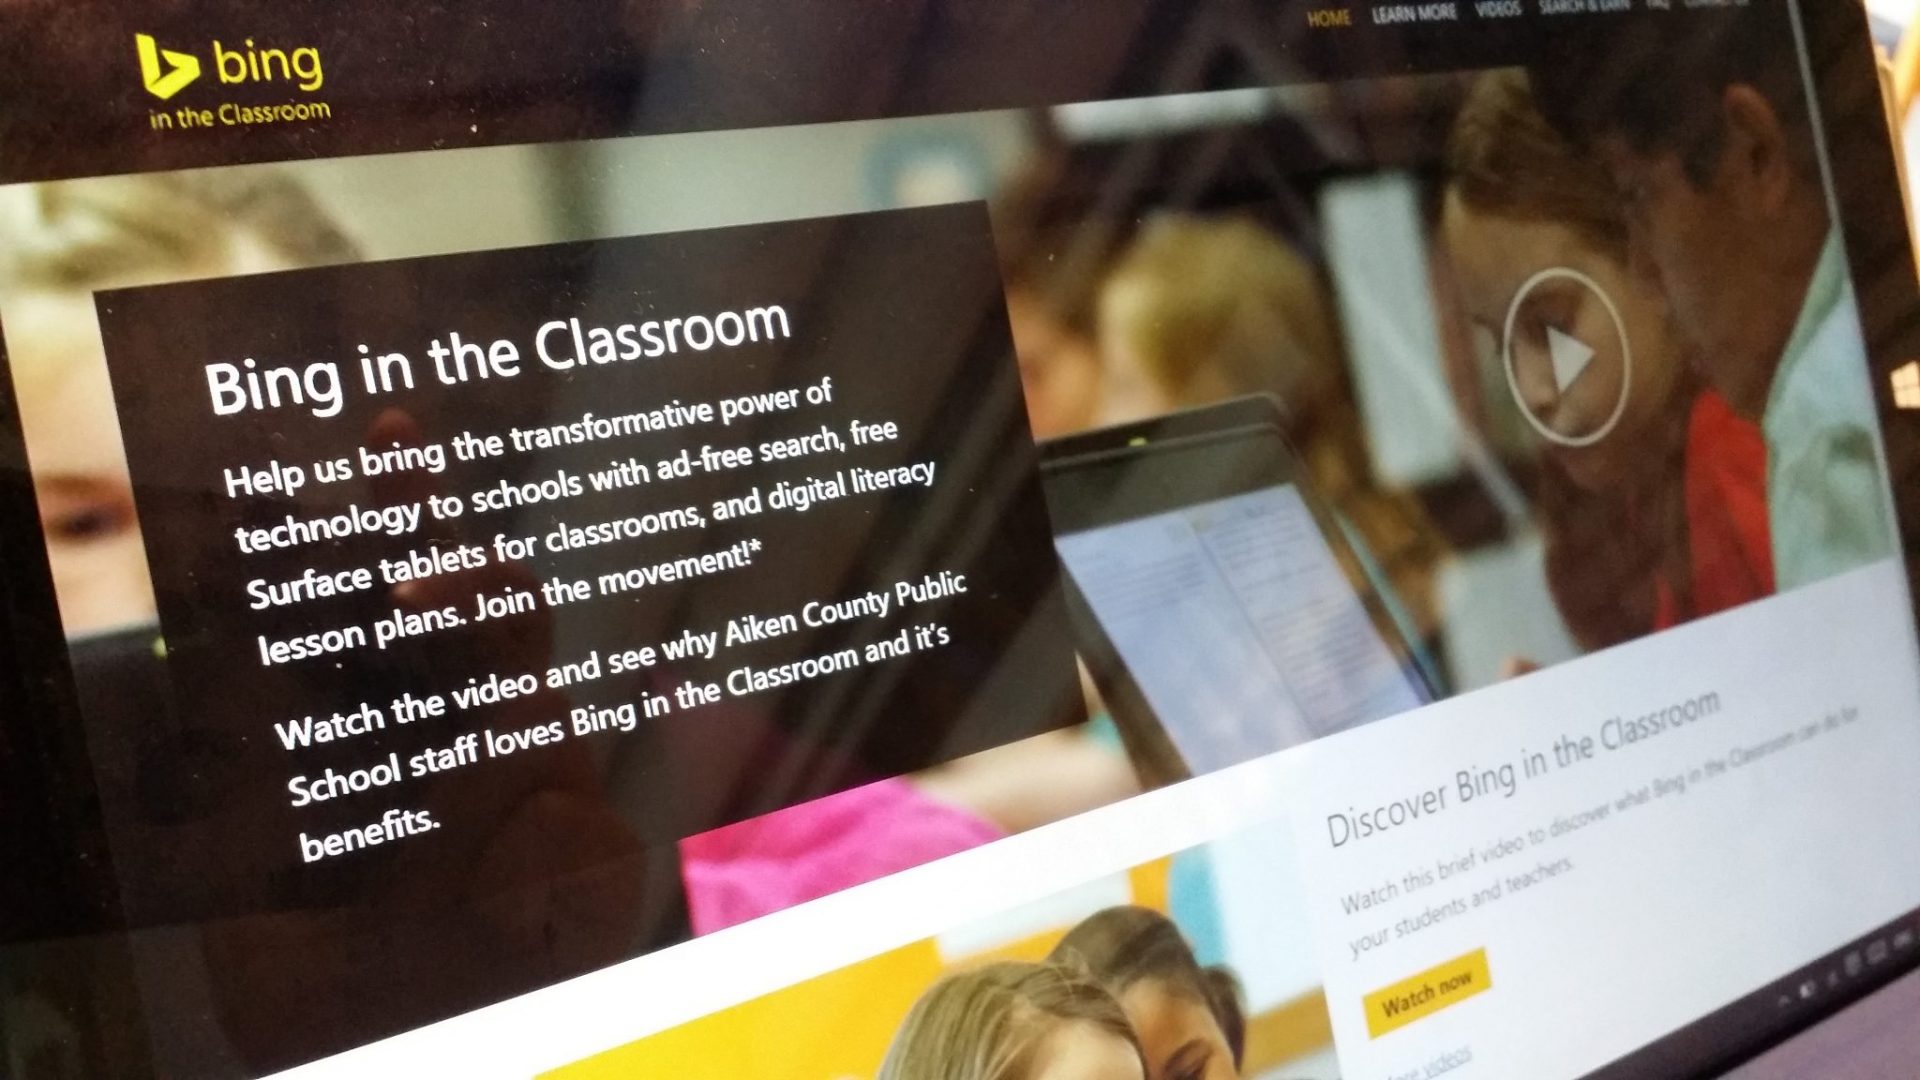 New videos from microsoft explain how to use bing in the classroom - onmsft. Com - september 29, 2015